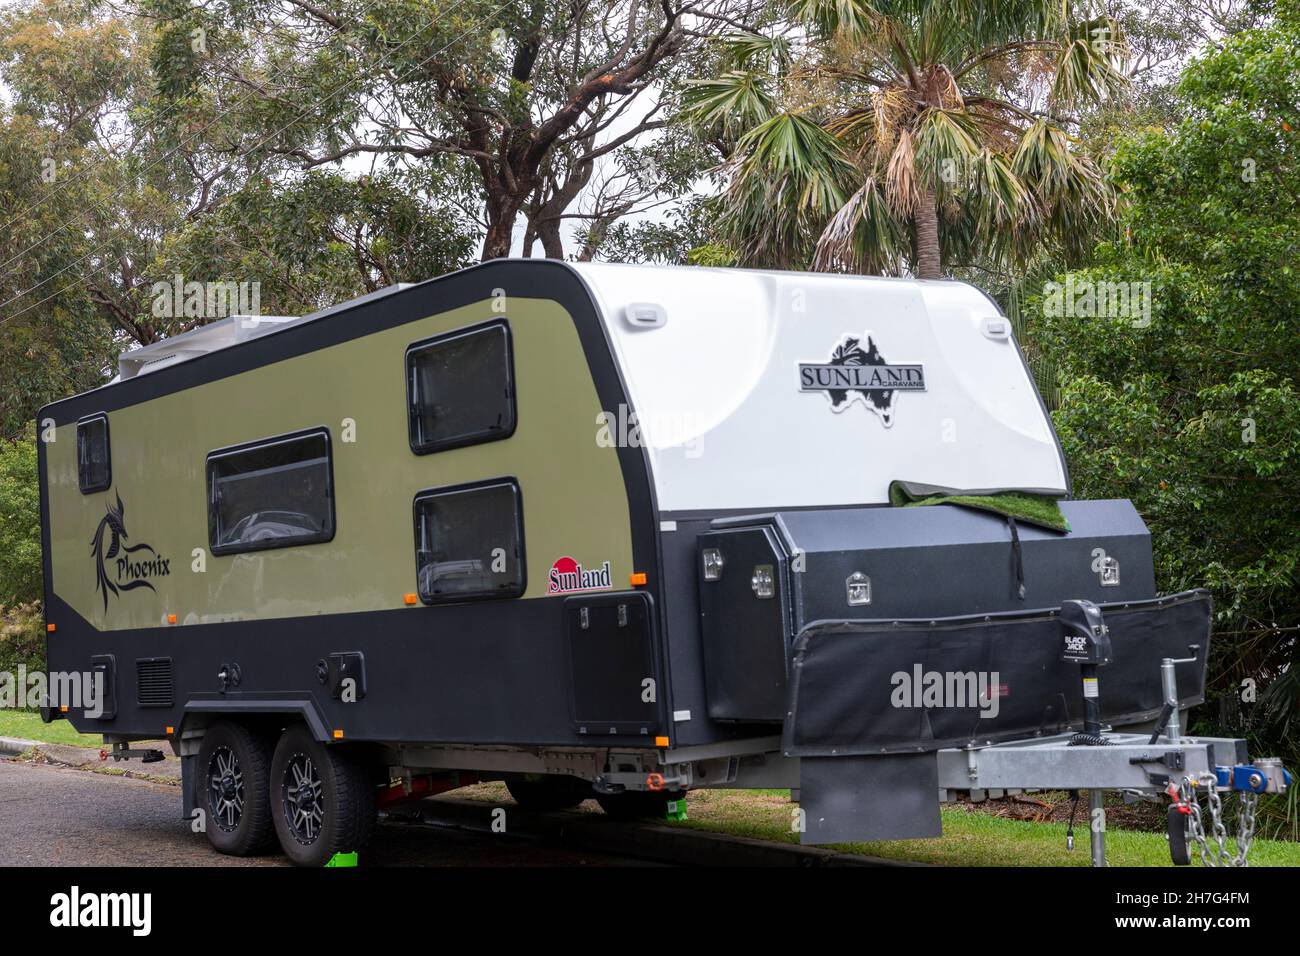 Camper Van Australia High Resolution Stock Photography and Images - Alamy